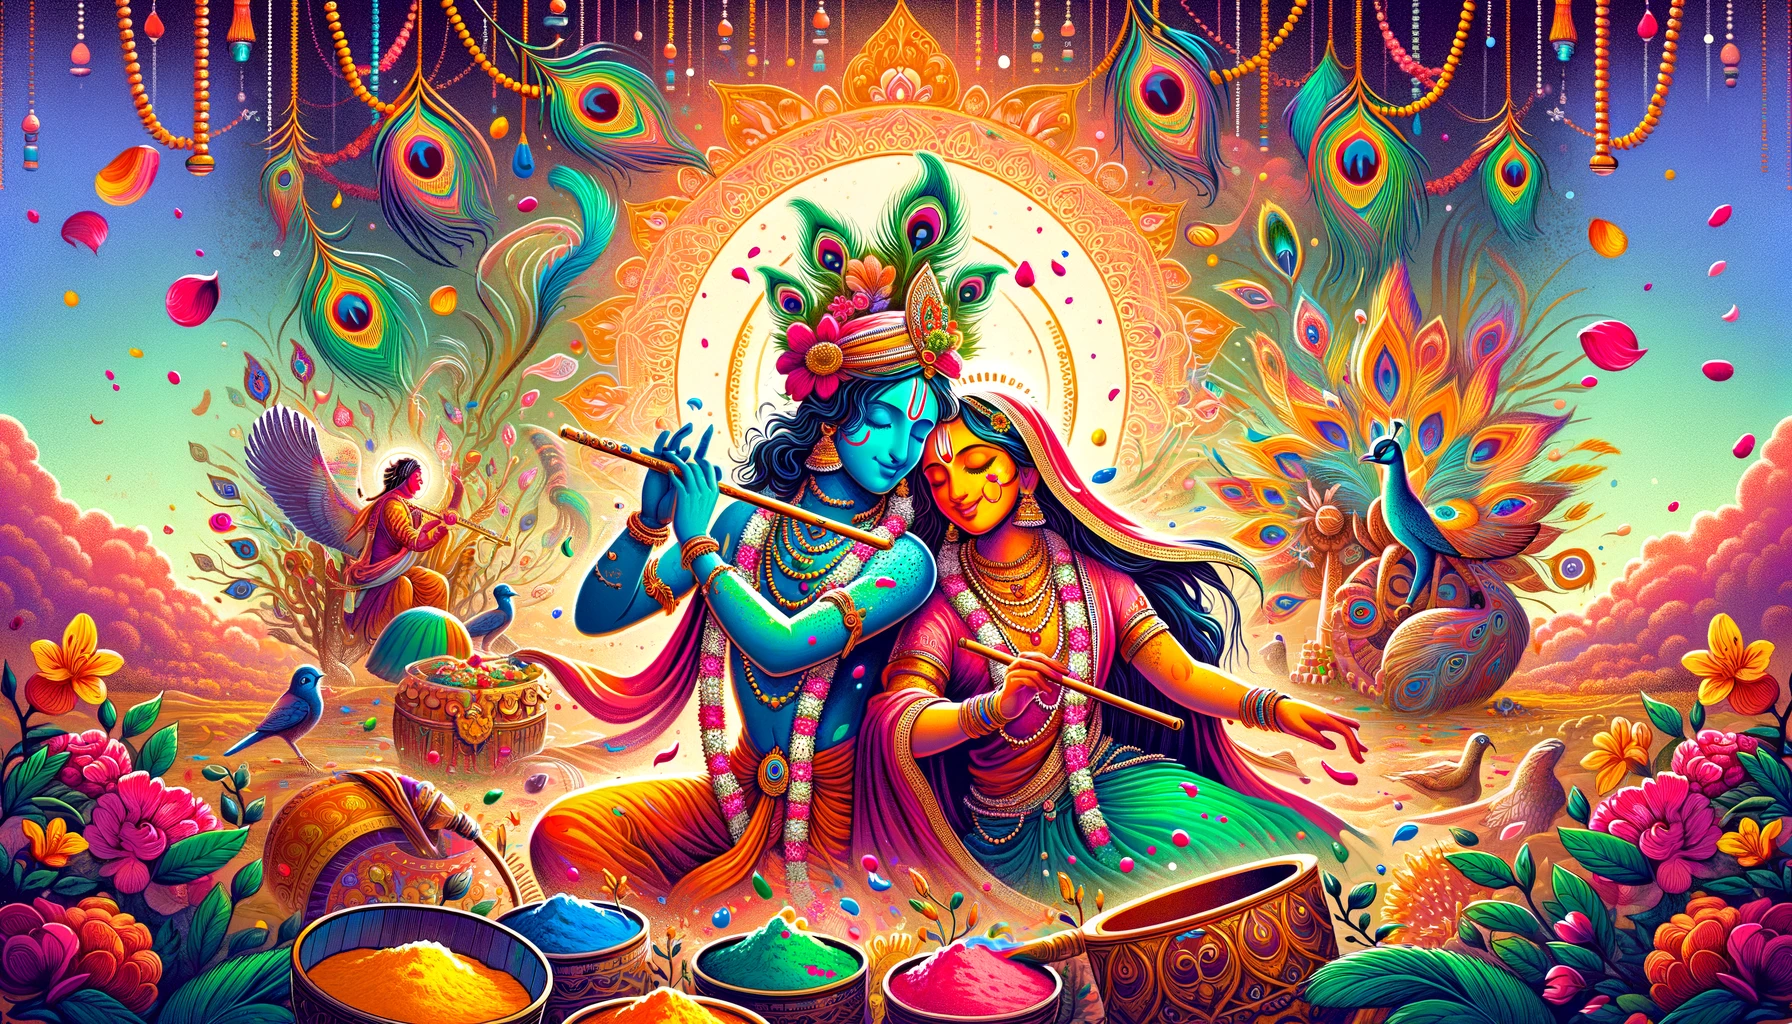 Artistic blog header illustration depicting the divine love story of Radha and Krishna during Holi, featuring joyful colors, symbolic elements like the flute and peacock feathers, set against the backdrop of Vrindavan's lush groves, embodying the spirit of unity and festivity.